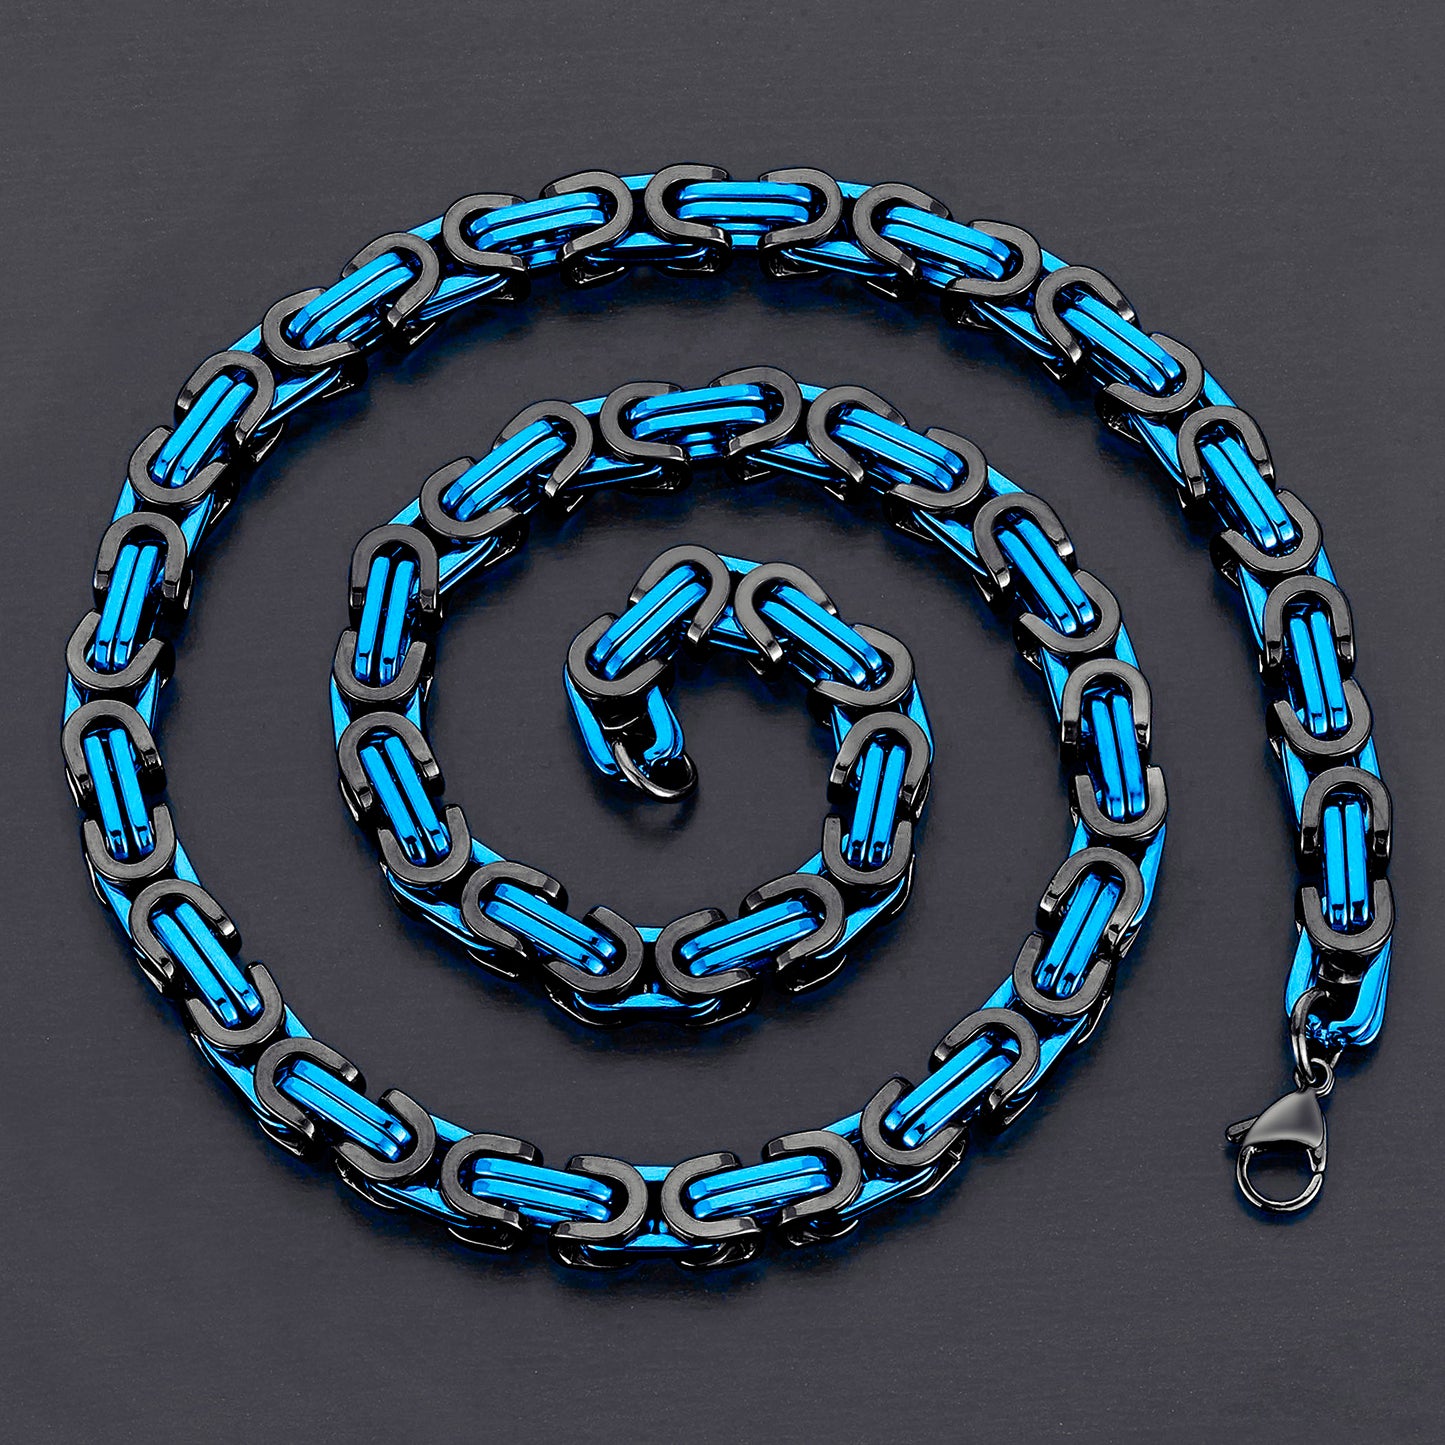 Men's Black and Blue Polished Stainless Steel Byzantine Chain Necklace (8mm) 24"